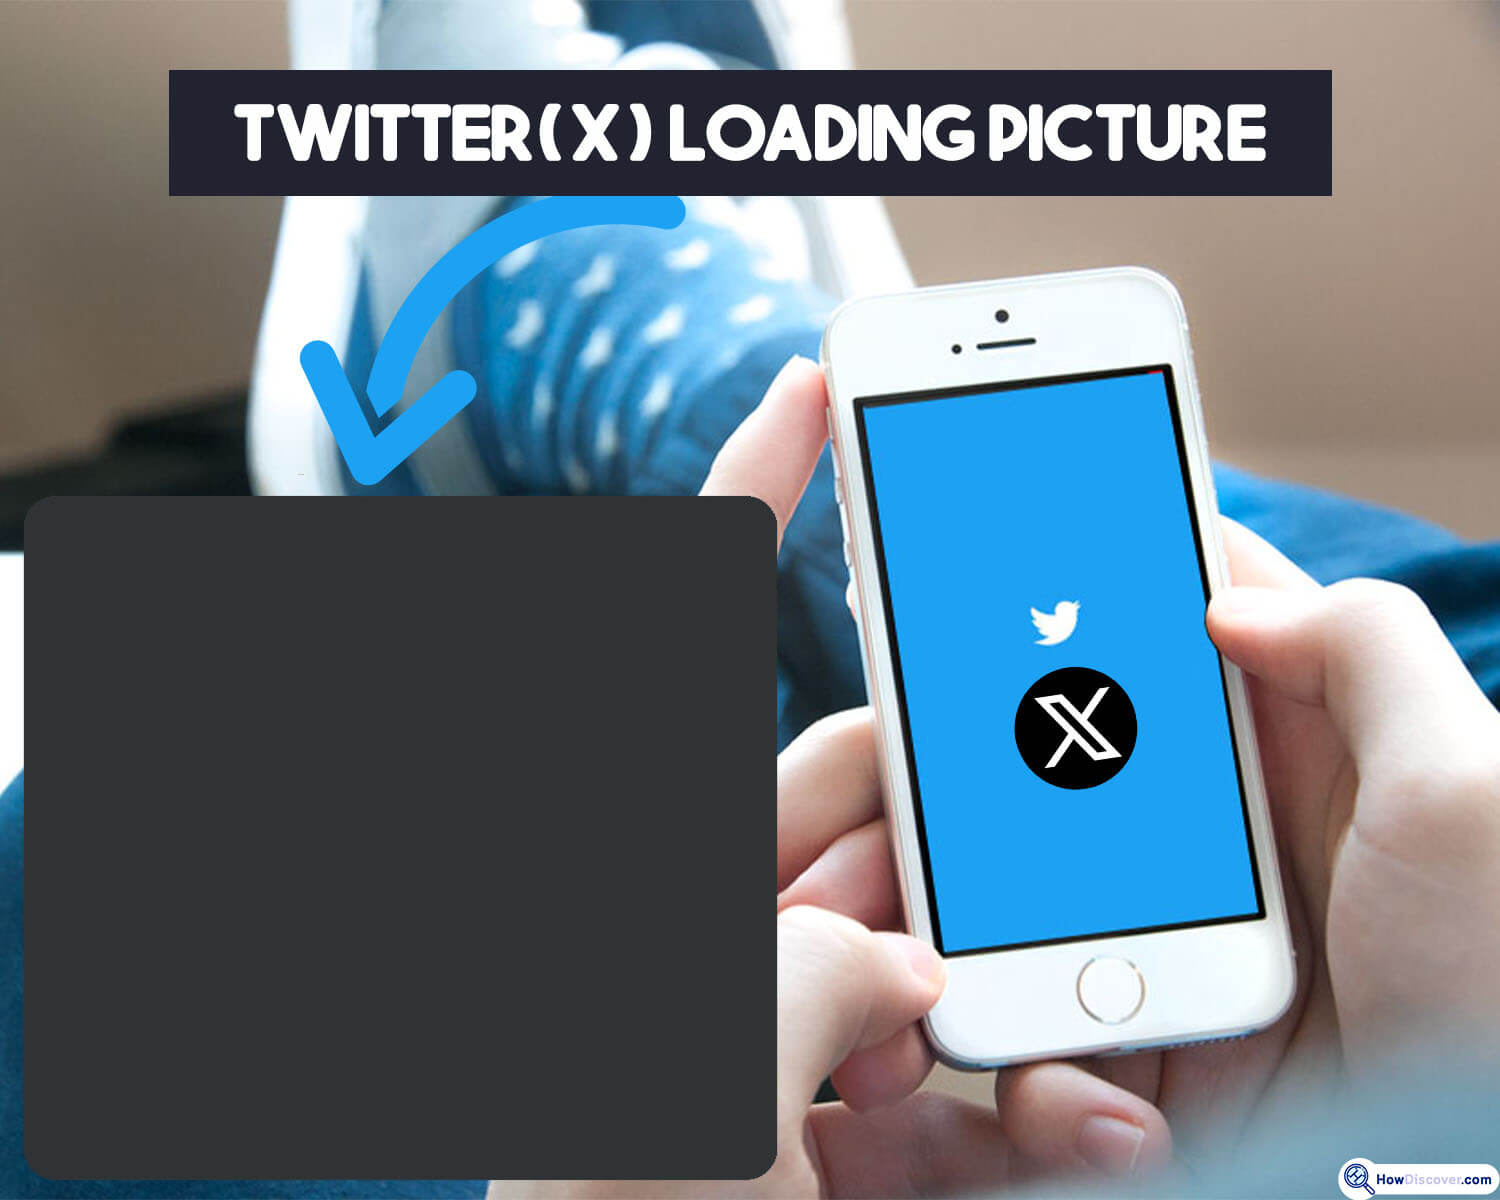 Twitter(X) Loading Picture